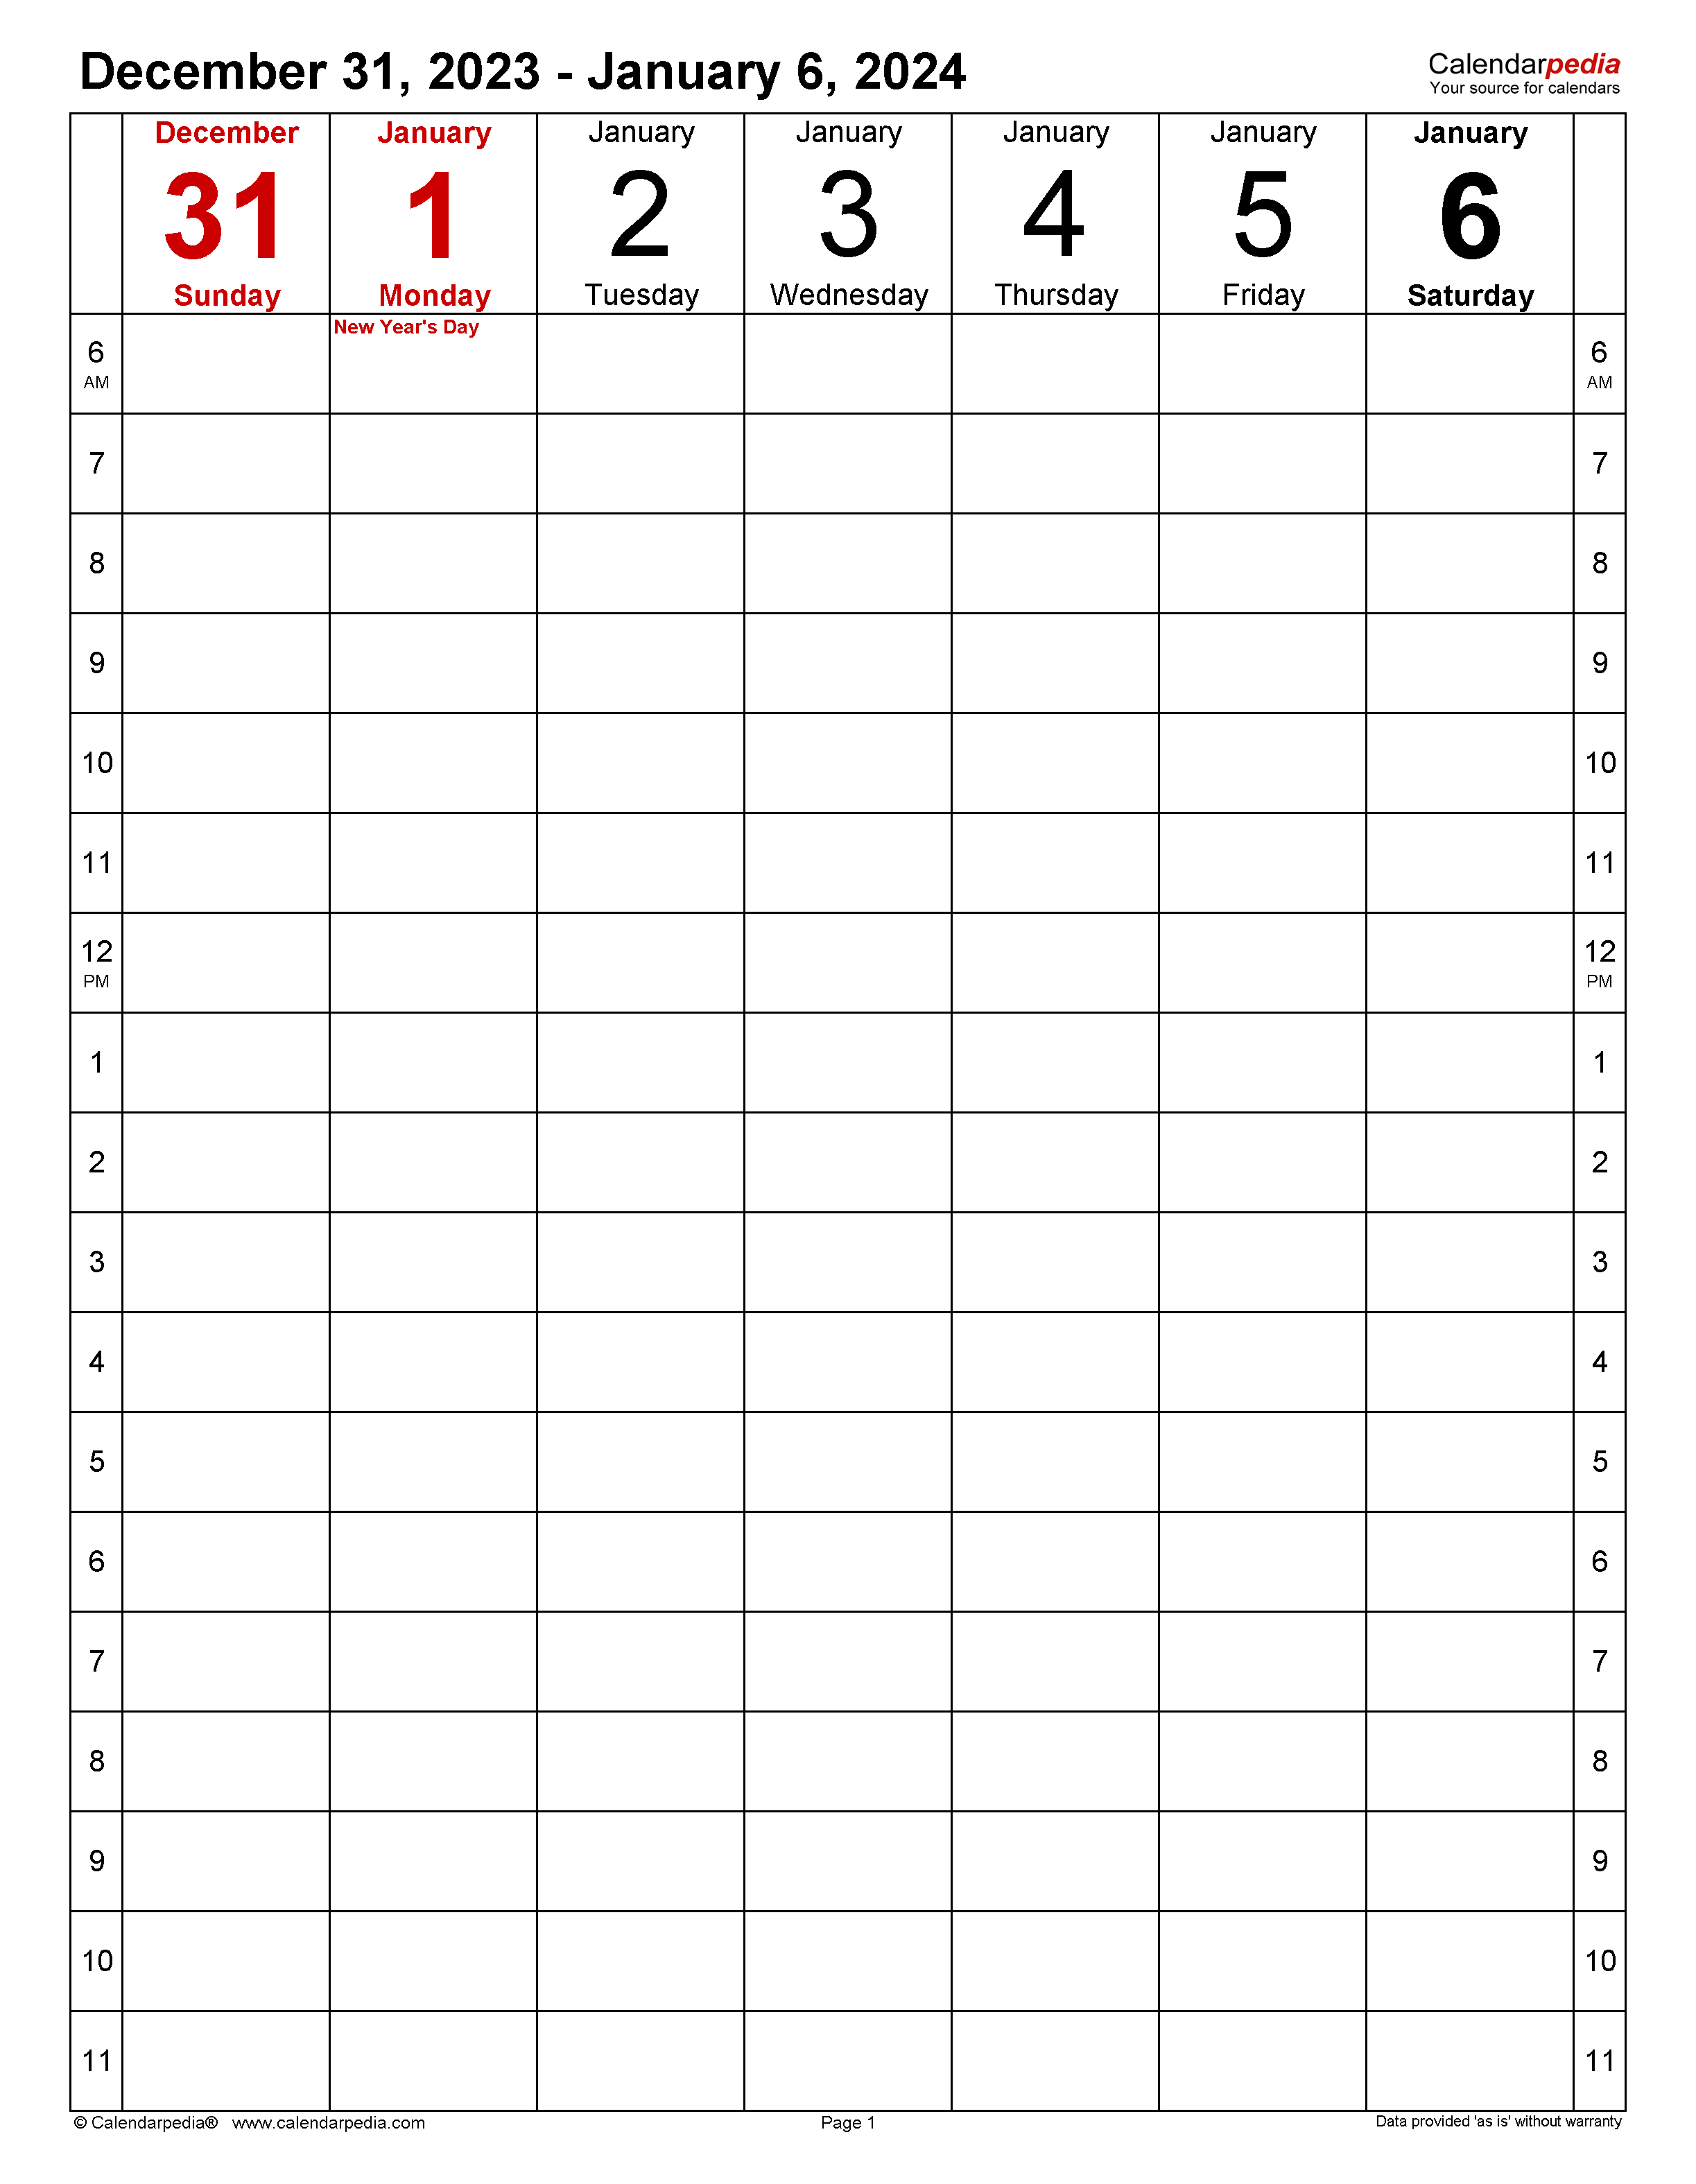 Weekly Calendars 2024 For Pdf - 12 Free Printable Templates throughout Free Printable Appointment Calendar 2024